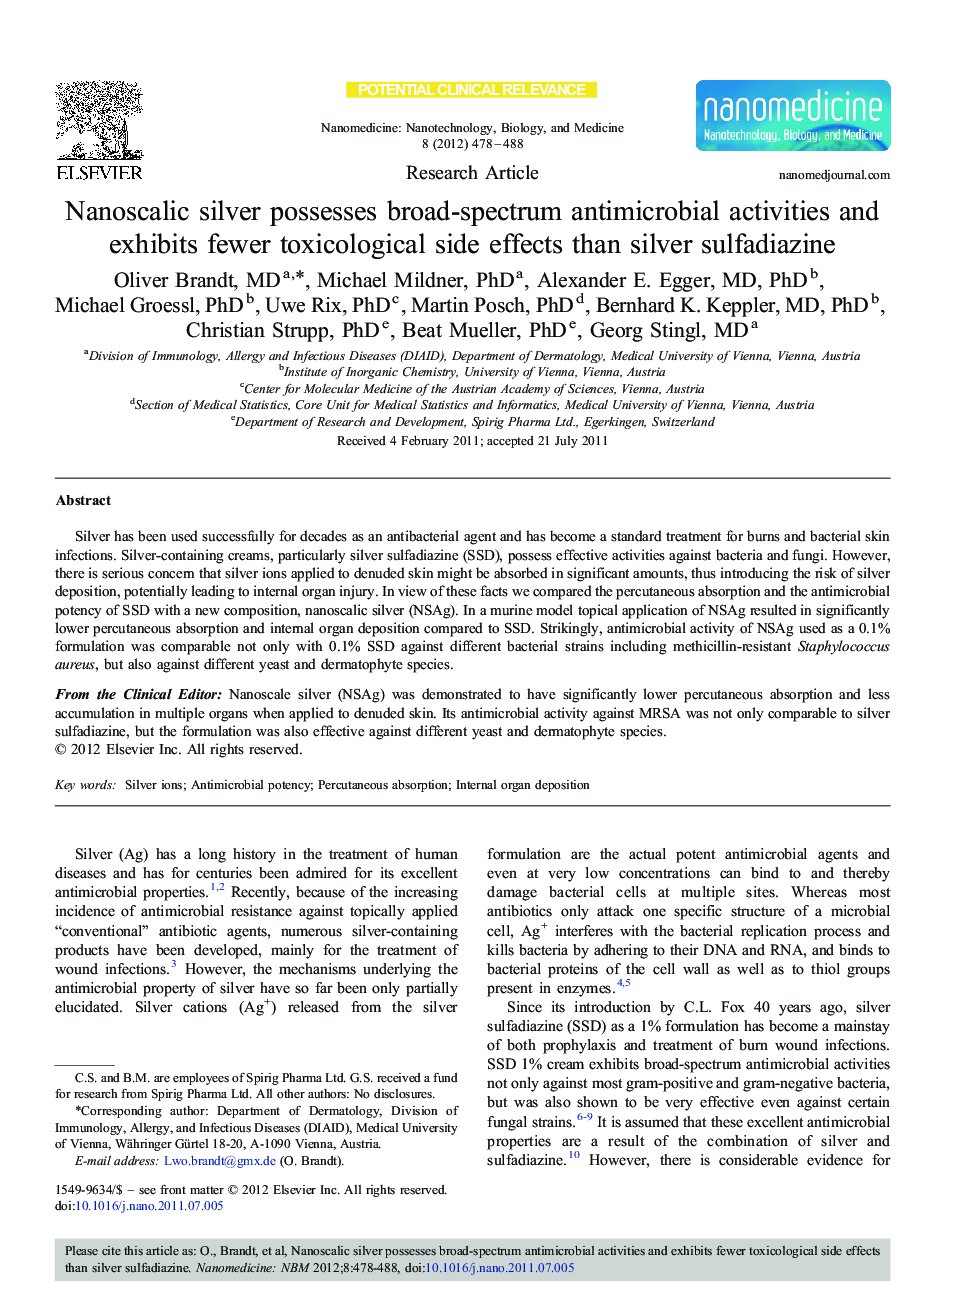 Nanoscalic silver possesses broad-spectrum antimicrobial activities and exhibits fewer toxicological side effects than silver sulfadiazine 